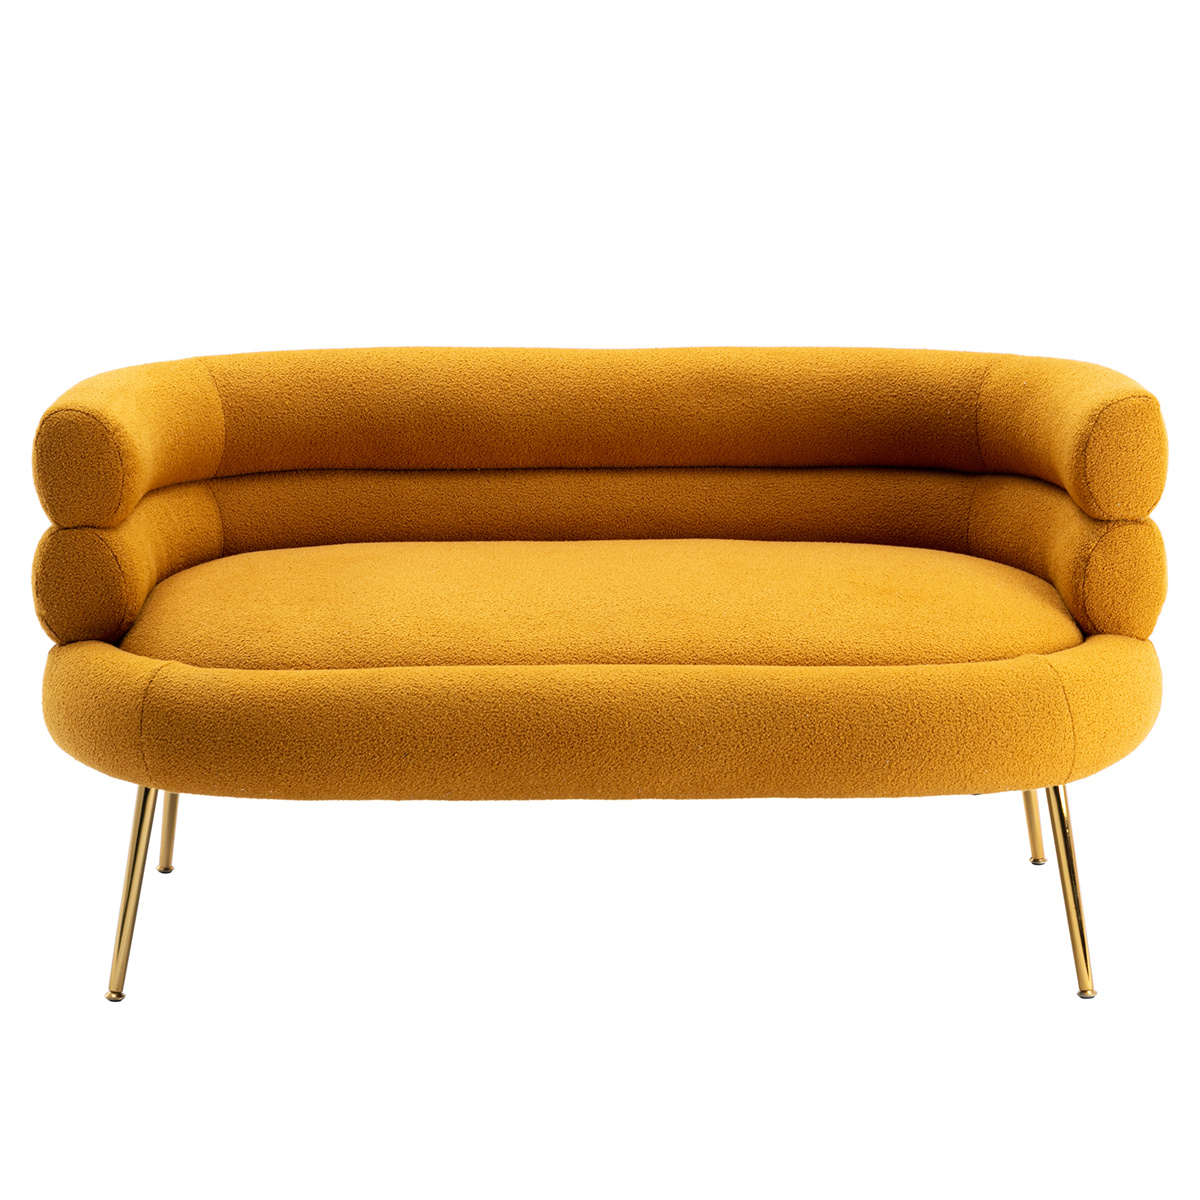 Living Room Accent Sofa, Leisure Loveseat Sofa with Golden Metal Feet, Tufted Chaise Lounge Sofa with Curved Back, Upholstered Sofa Reading Chair for Home Apartment or Office, Mustard - image 4 of 7